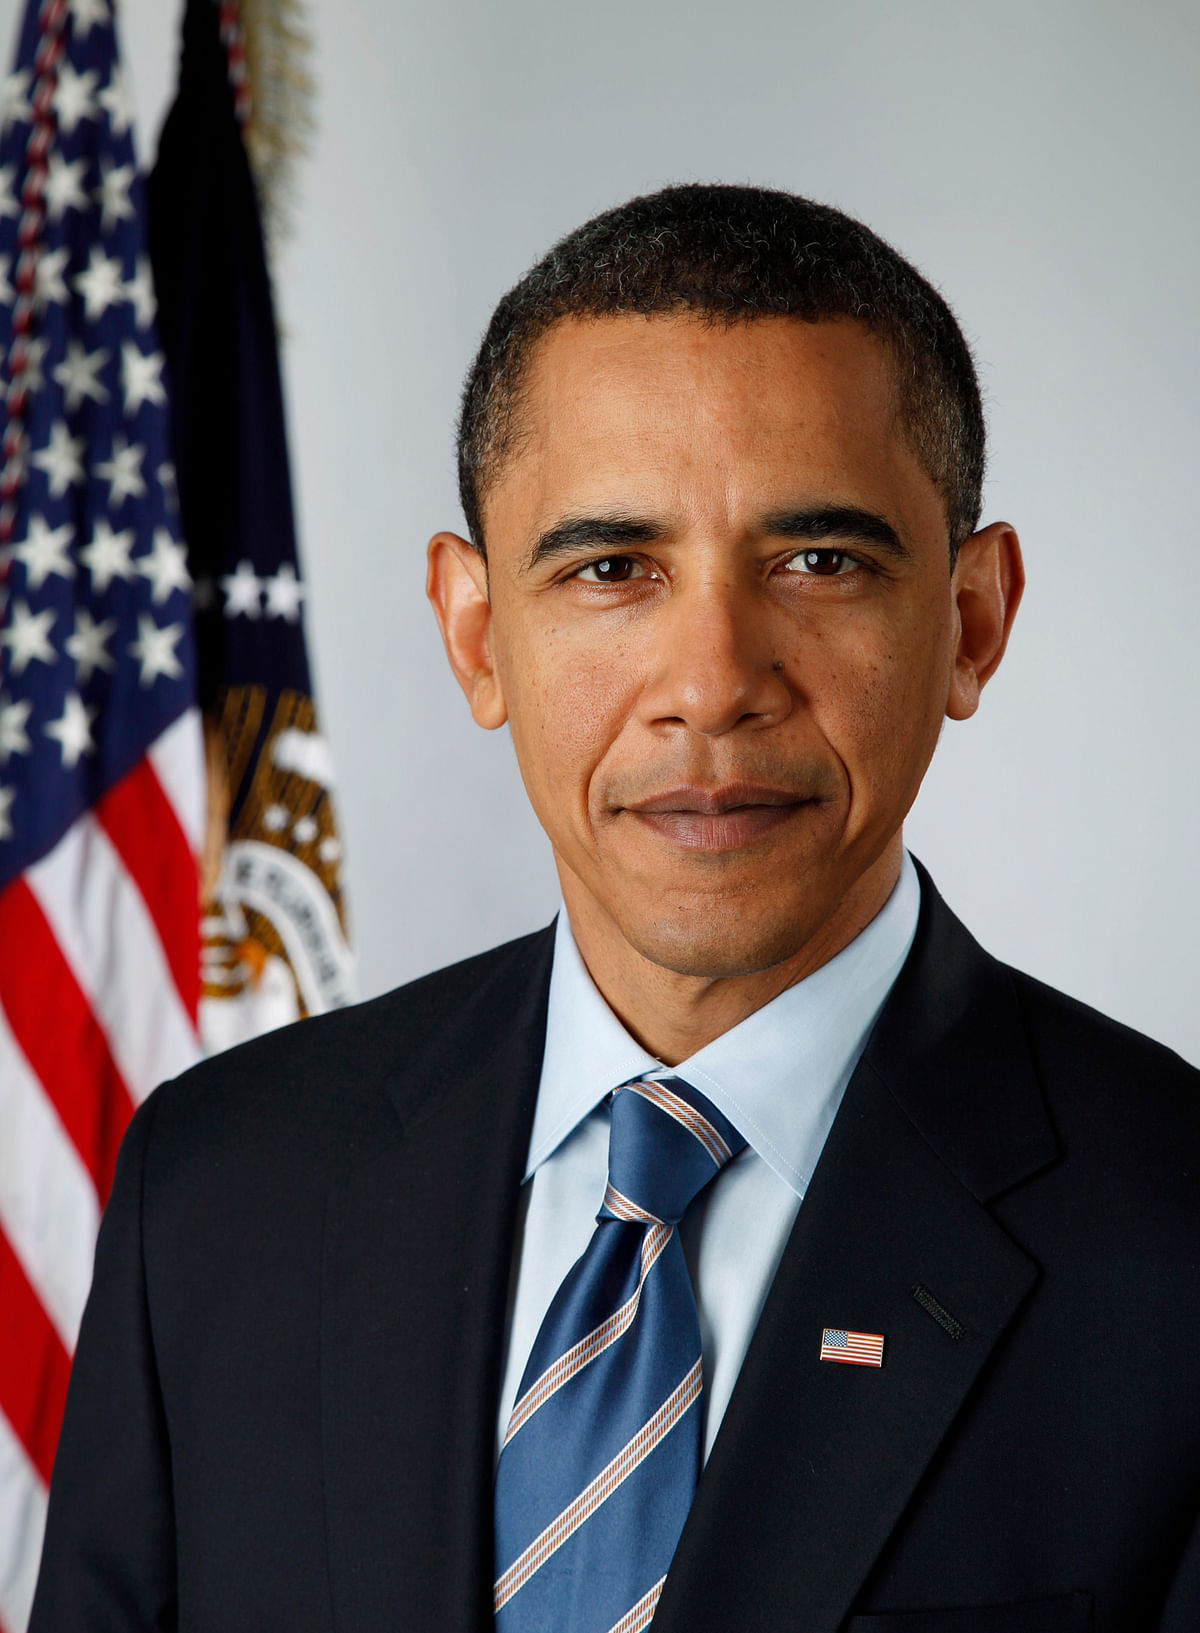 Official portrait of Barack Obama. Photo: Collected